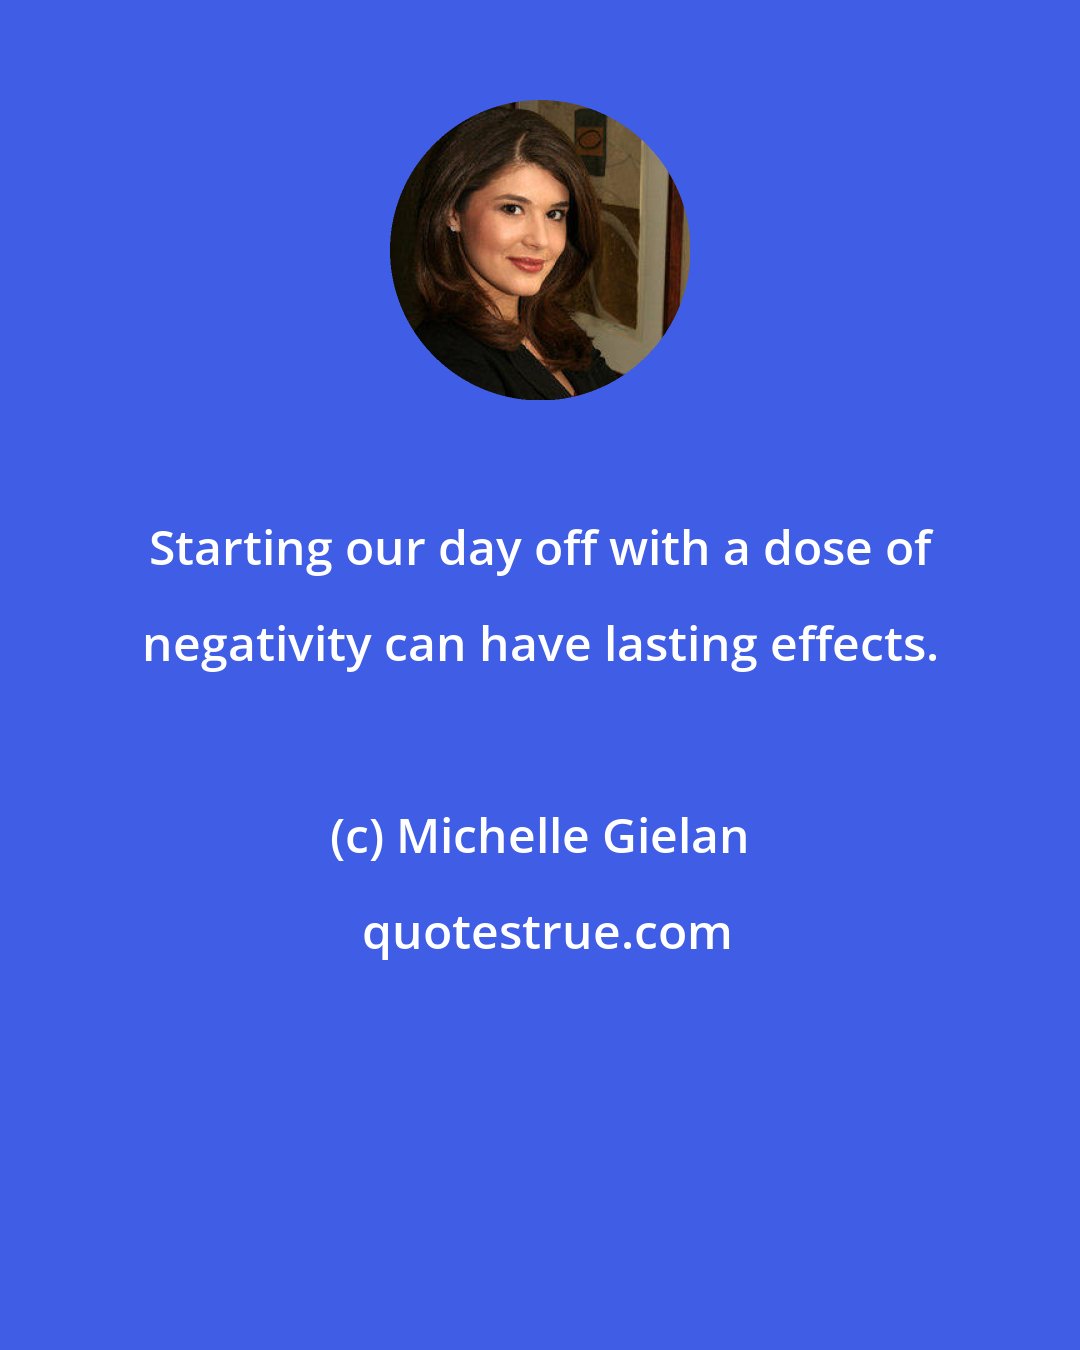 Michelle Gielan: Starting our day off with a dose of negativity can have lasting effects.